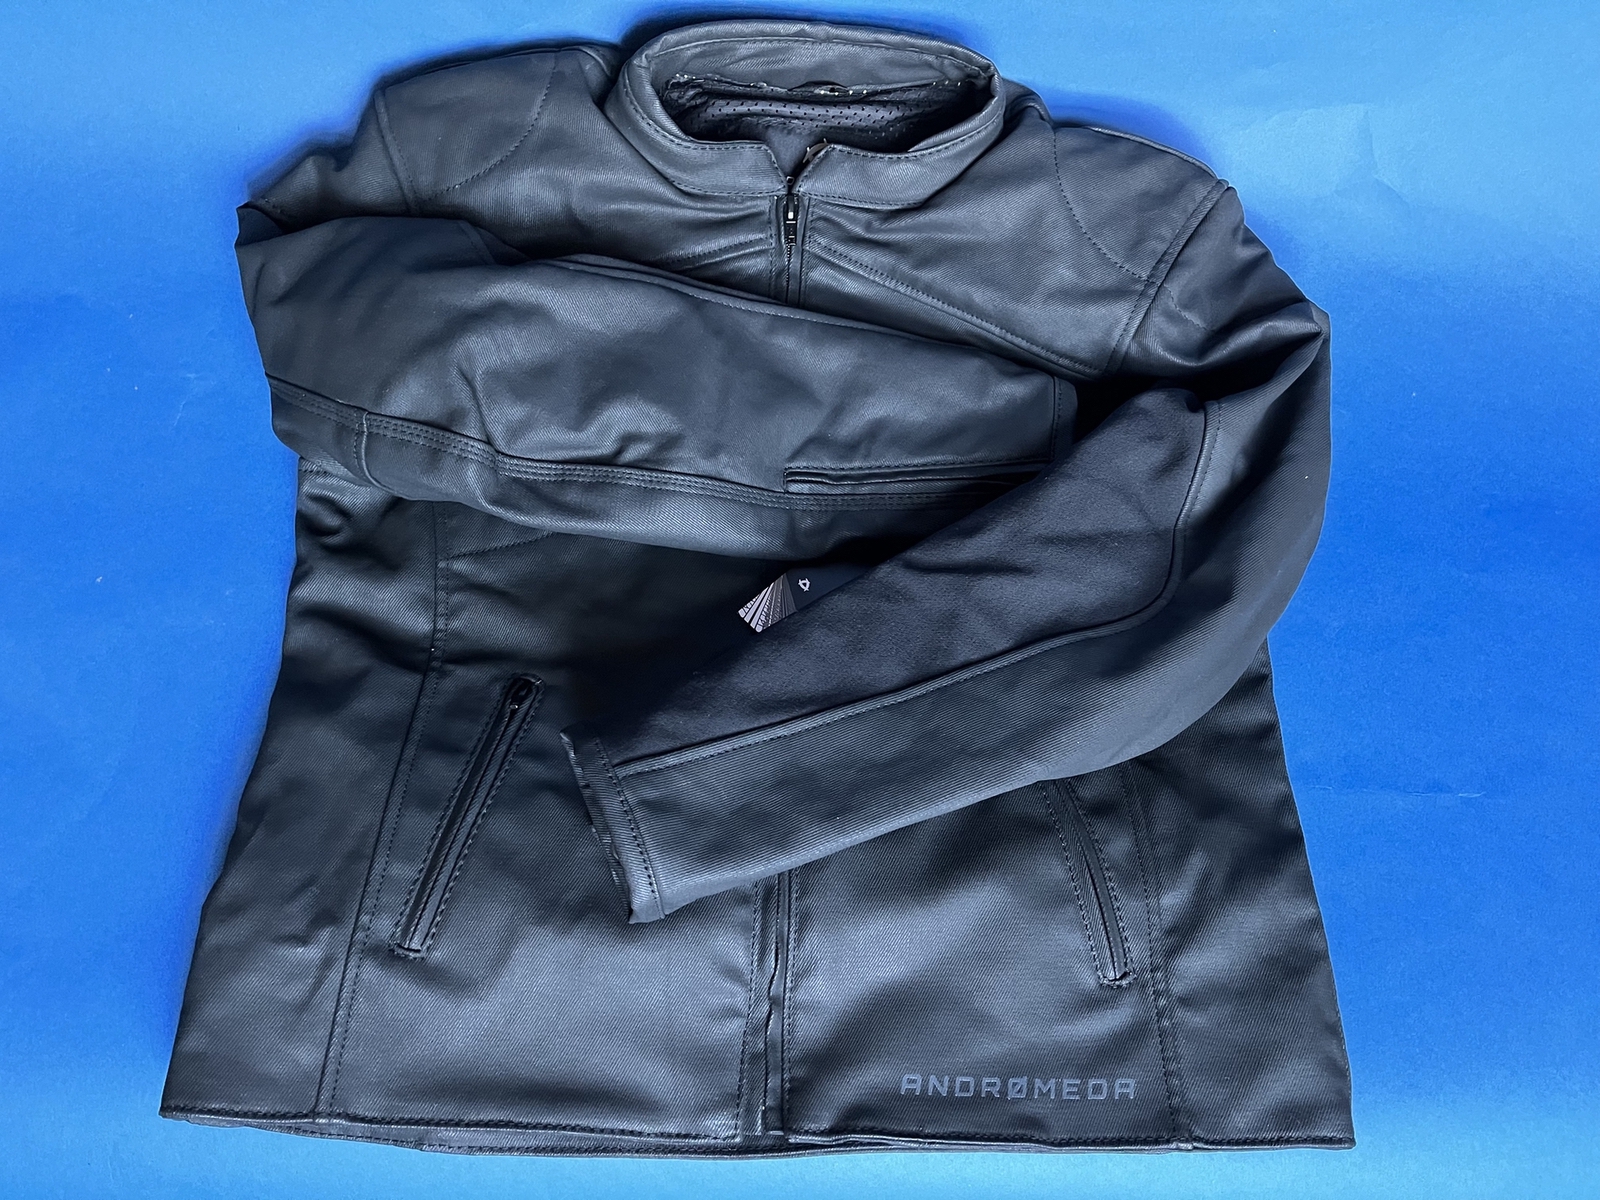 Front of Neowise Jacket by Andromeda Moto on blue background